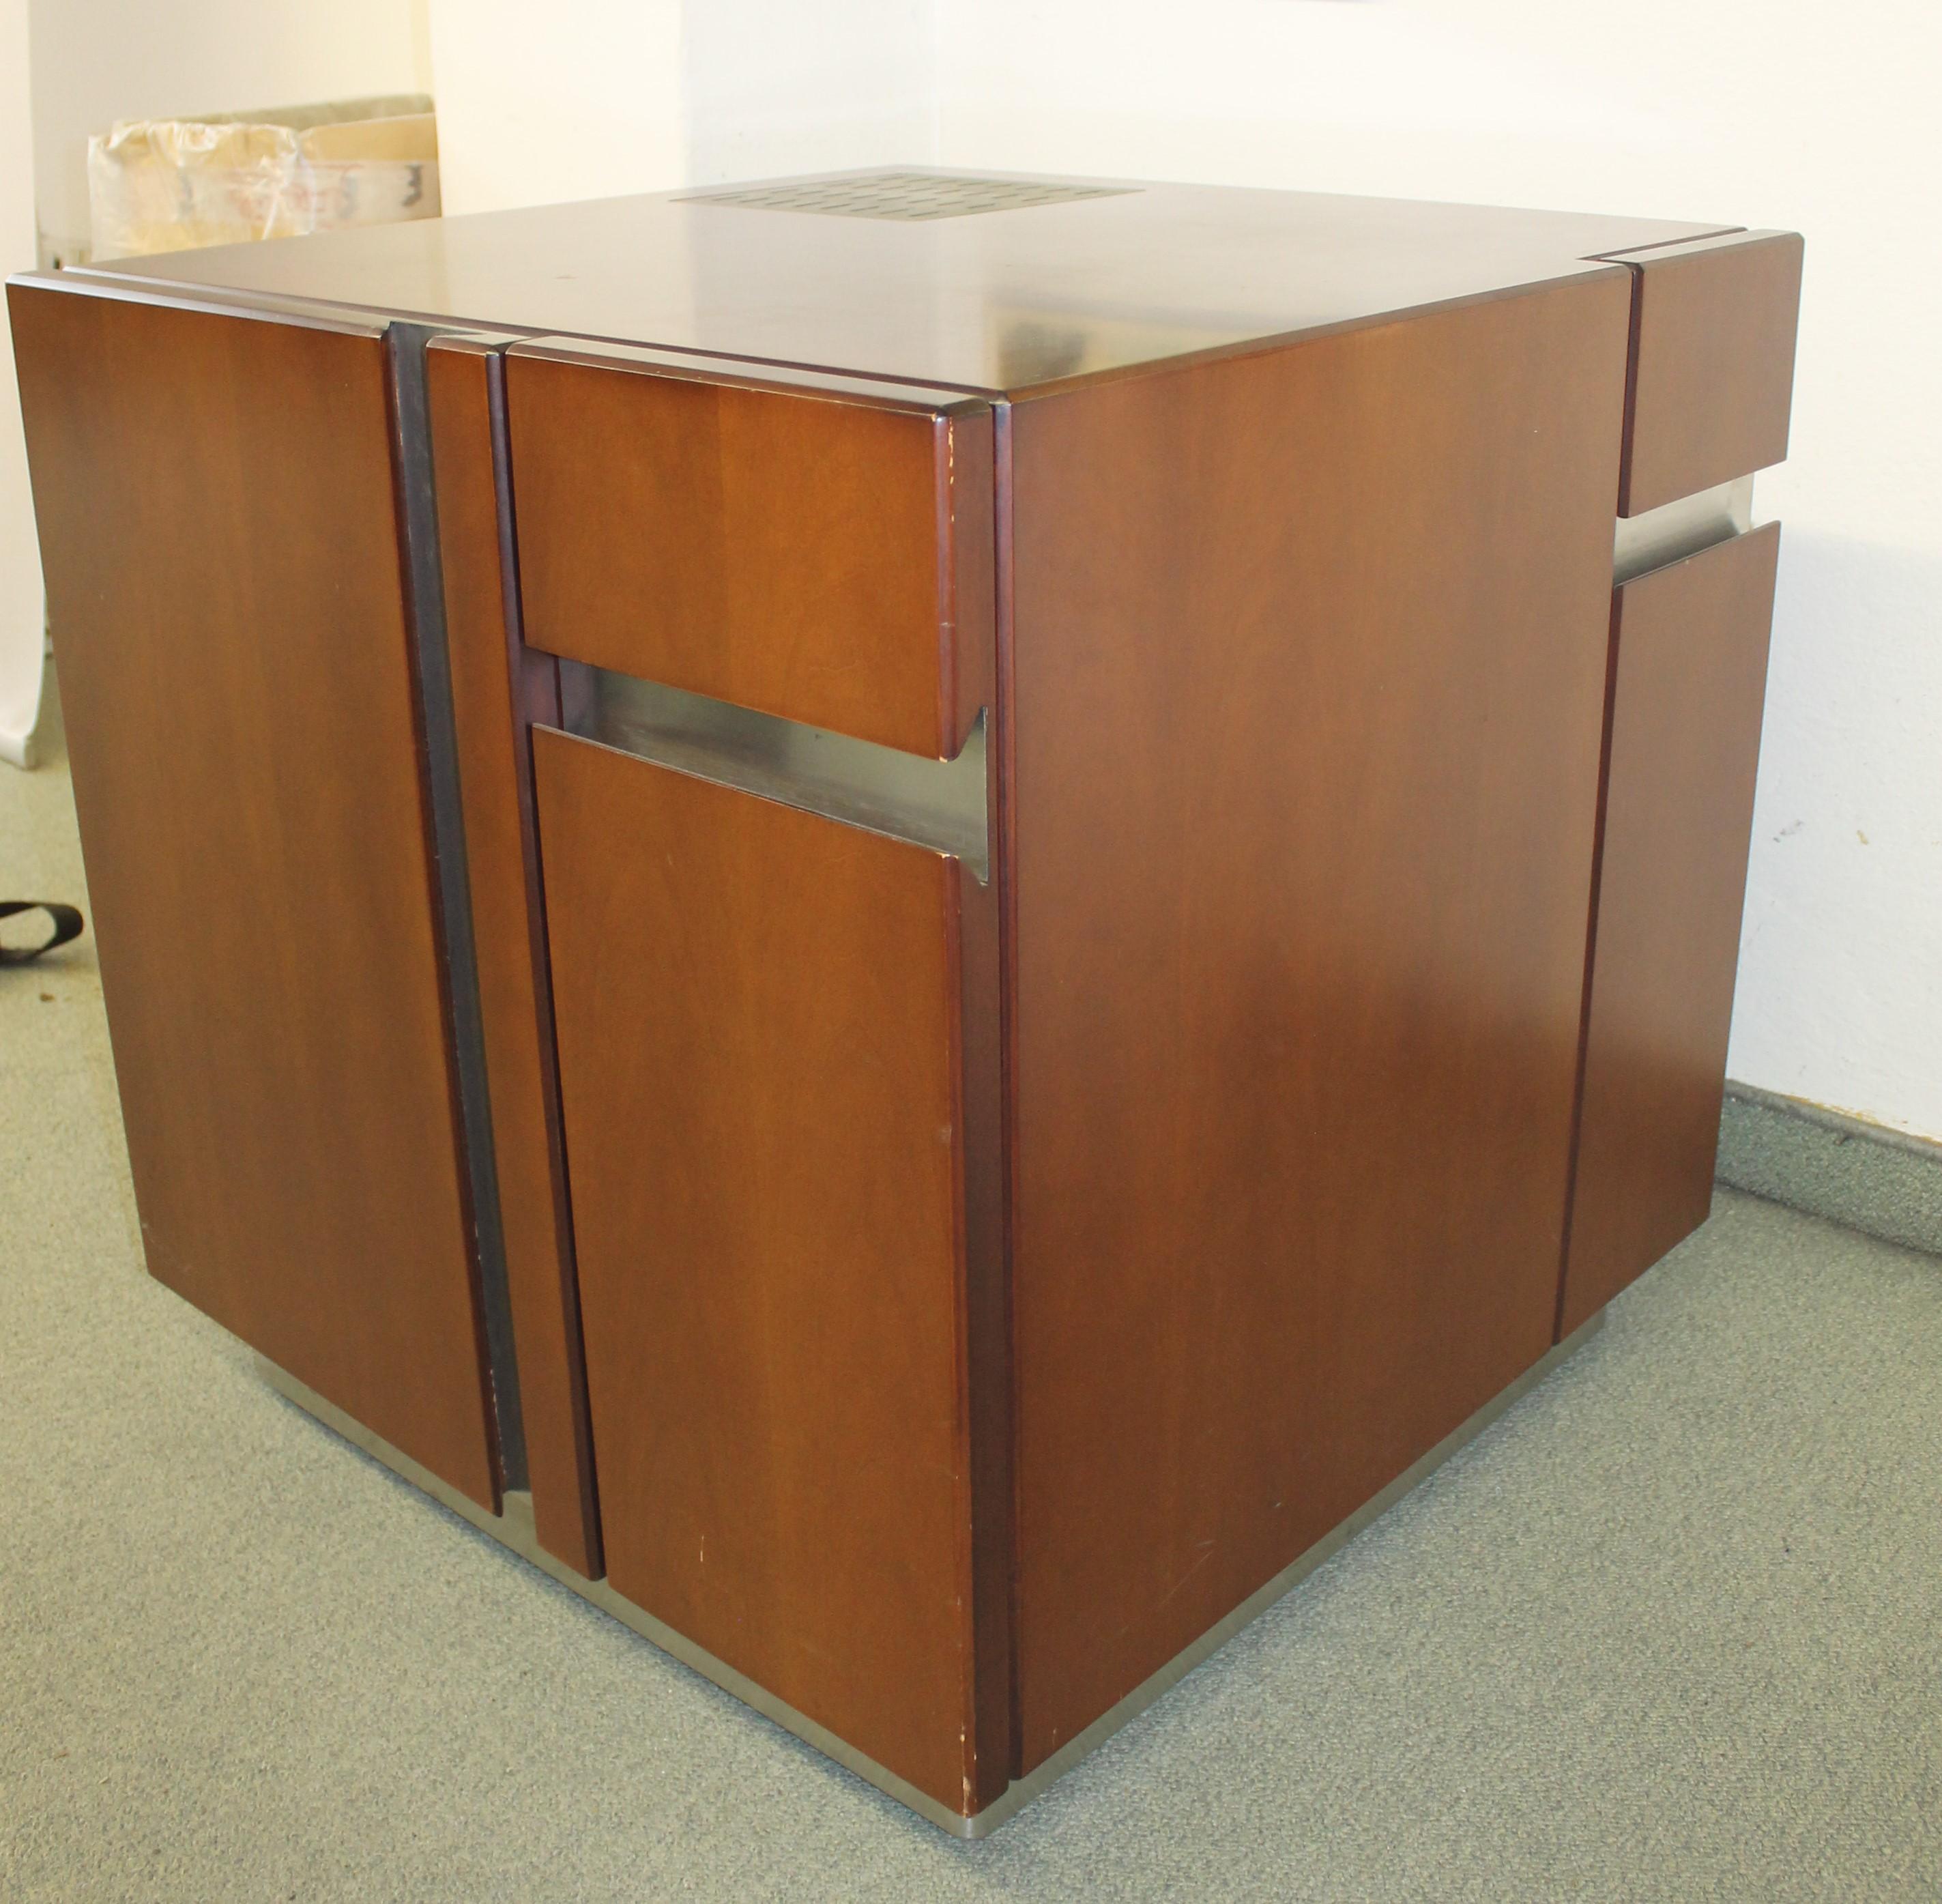 Cubic minibar designed from Formanova, circa 1970. Walnut structure with metal details.